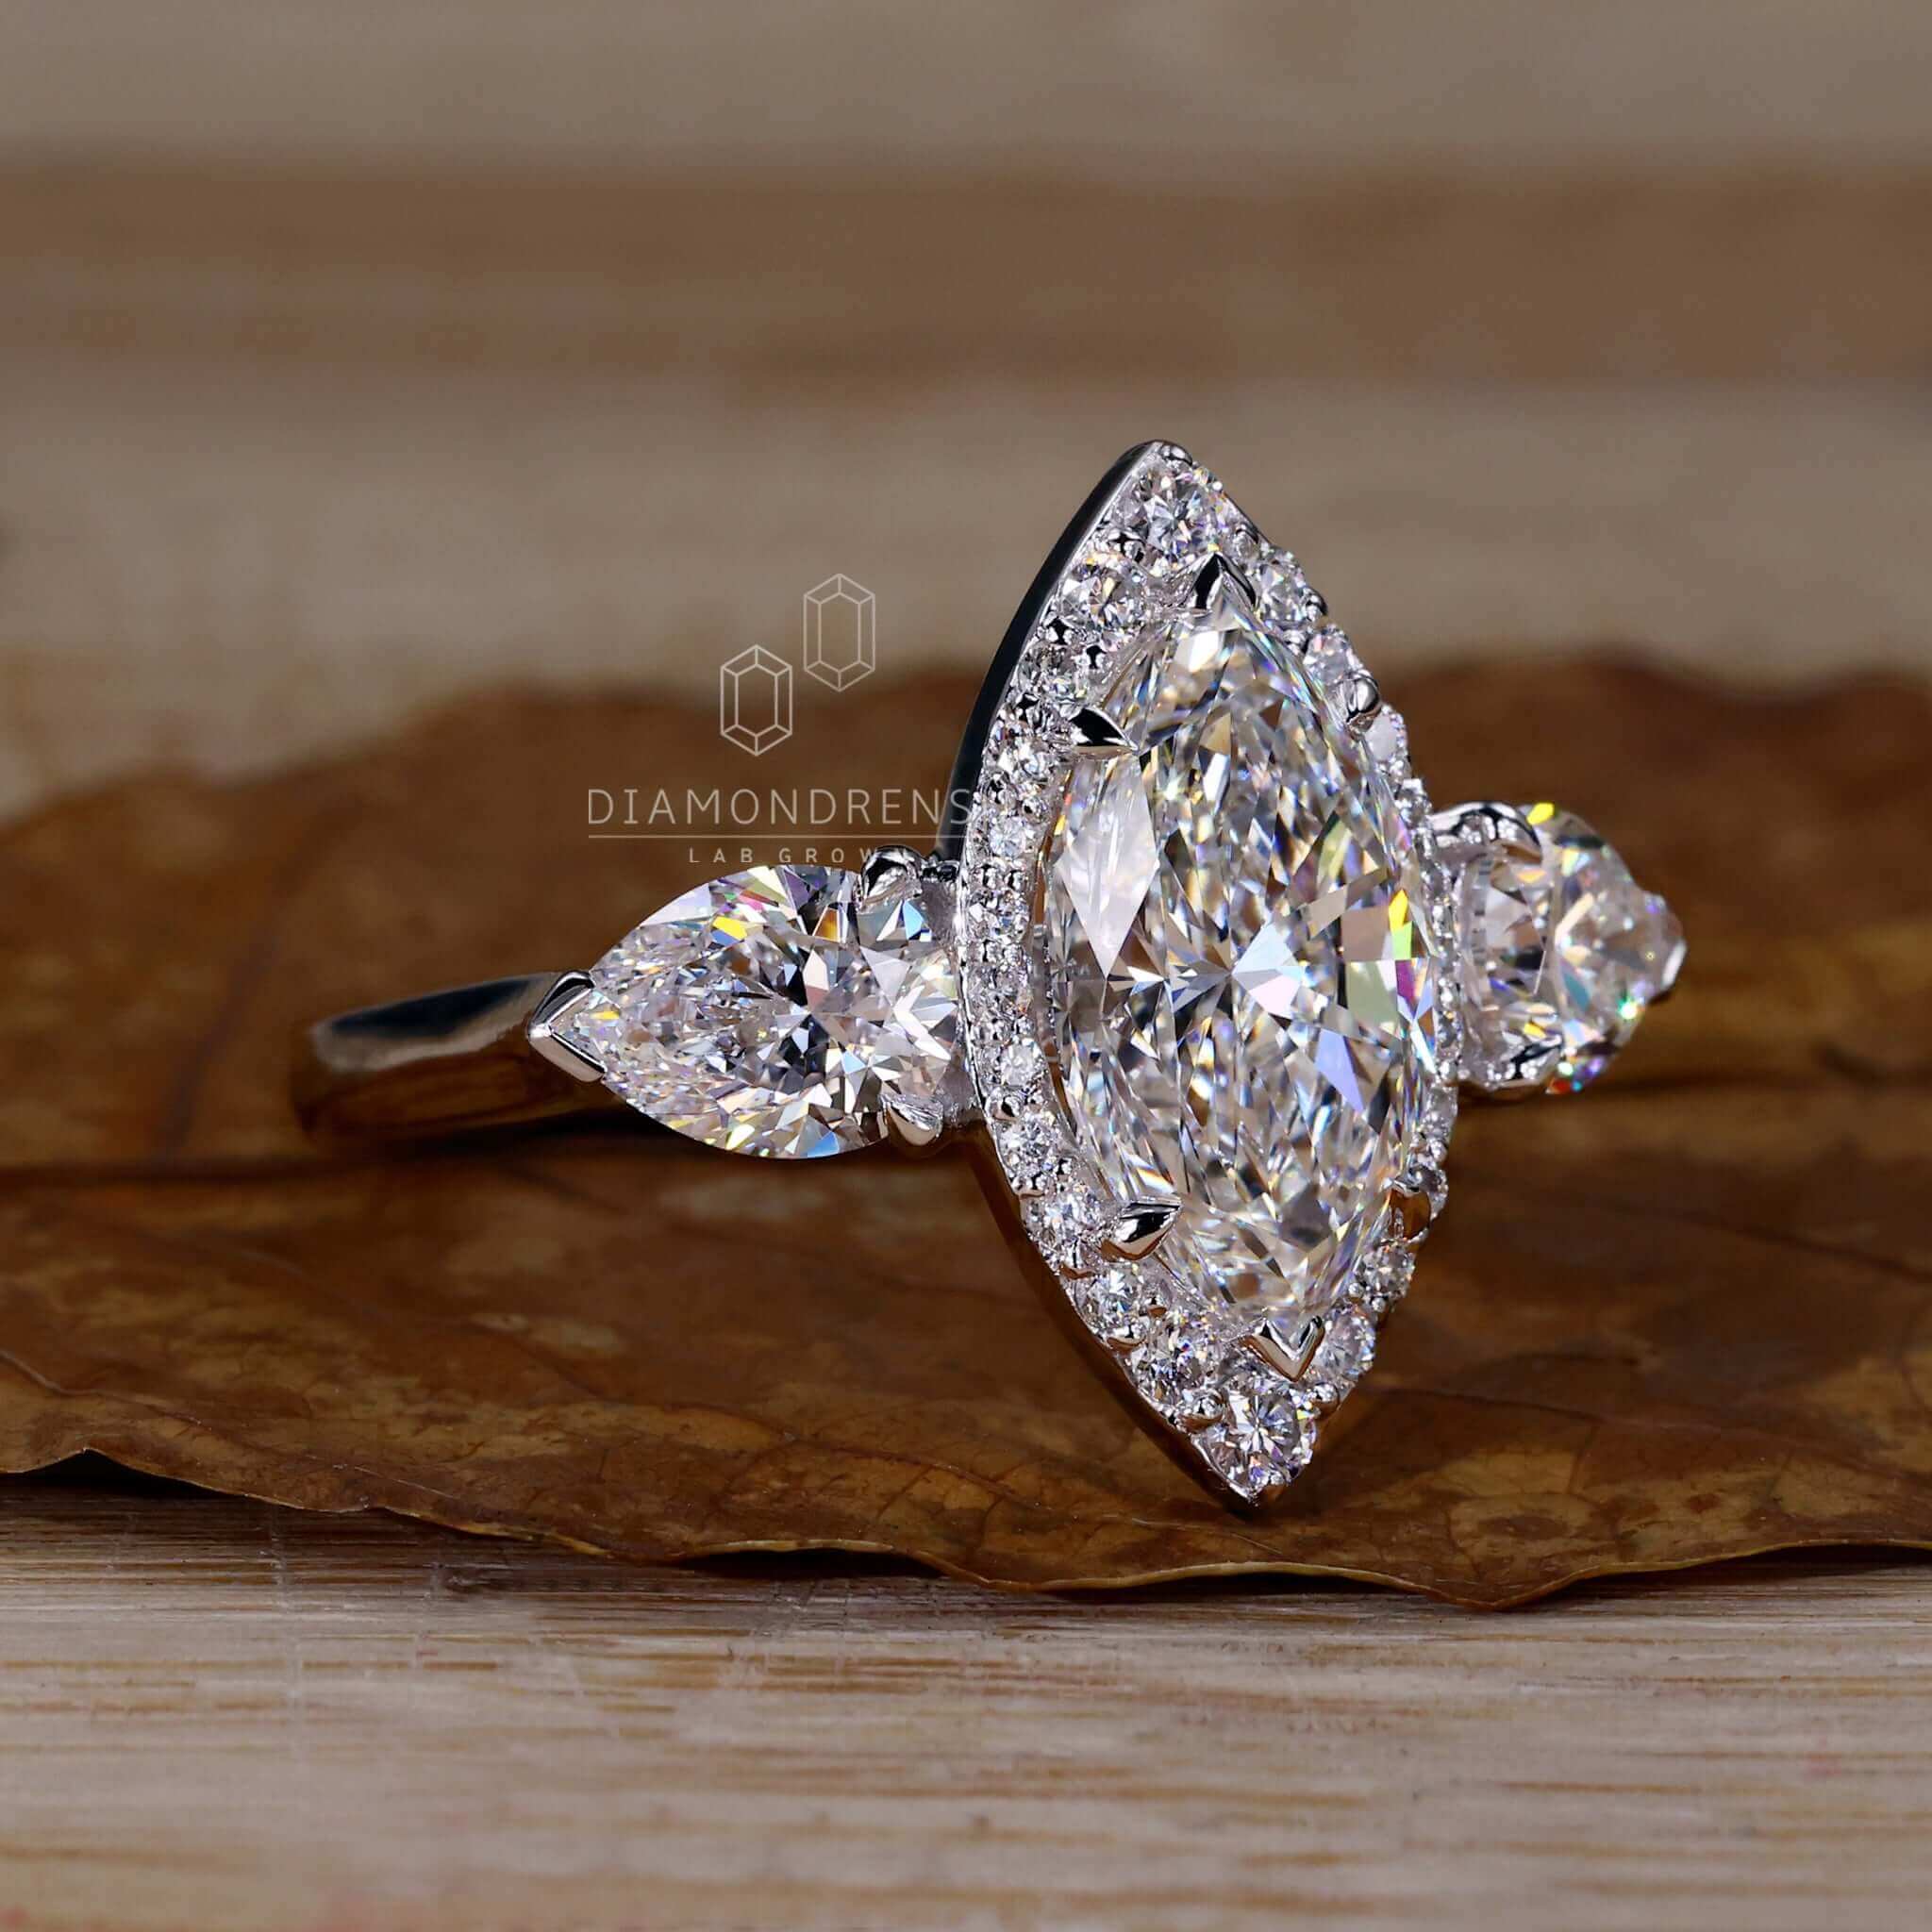 Pear Cut Lab Grown Diamond Engagement Ring with Matching Wedding Band